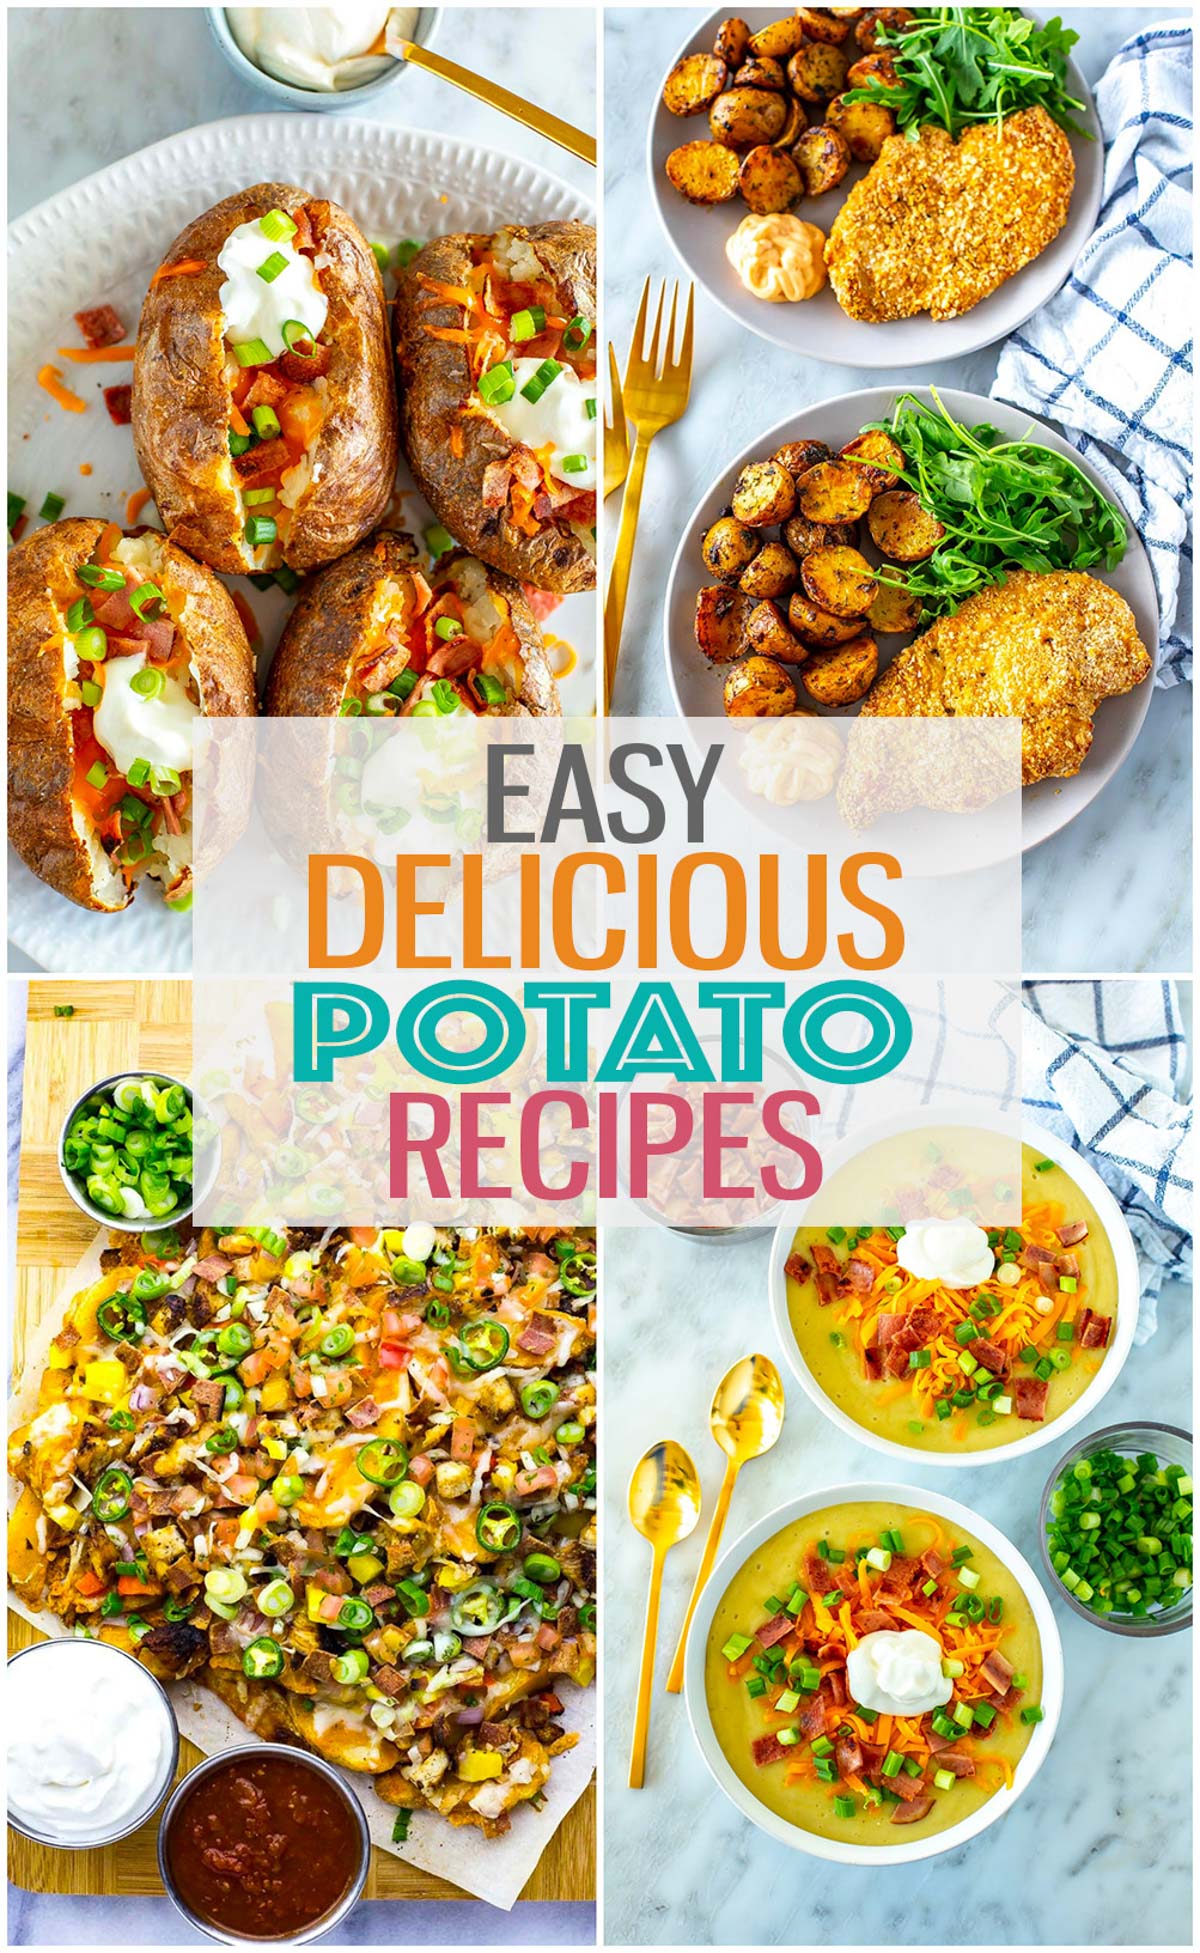 A collage of four different potato recipes with the text "Easy Delicious Potato Recipes" layered over top.